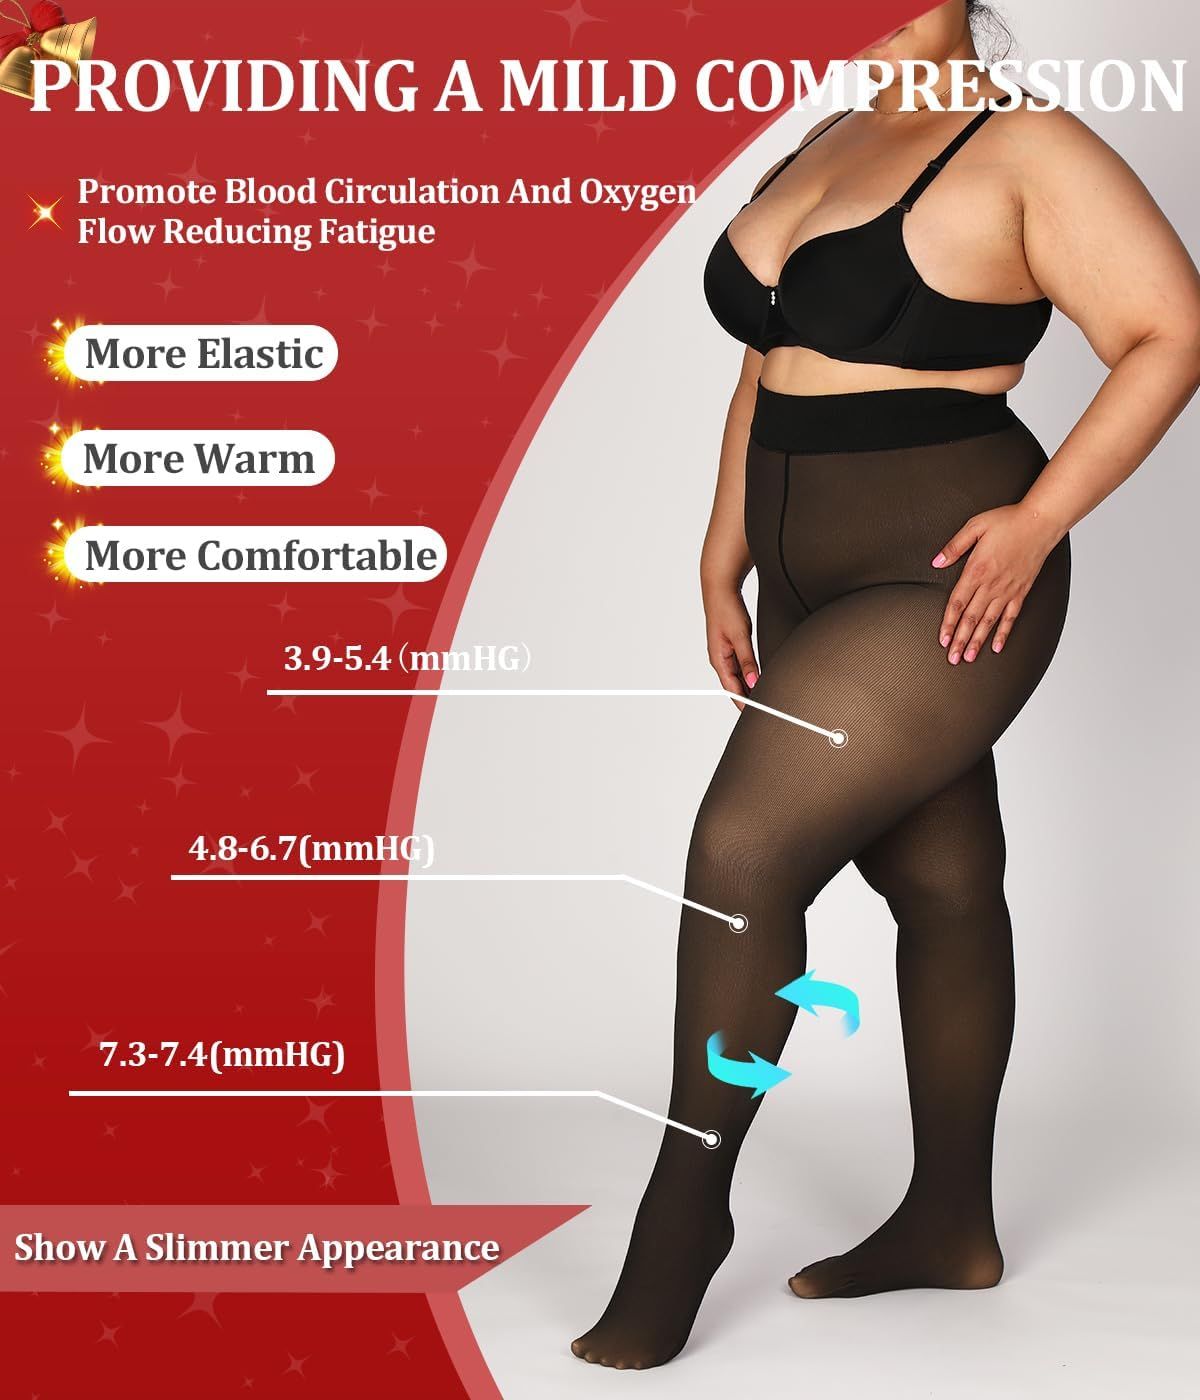 MERYLURE Plus Size Fleece Lined Tights,Winter Warm Fake Translucent Leggings for Women,Thick Ther... | Amazon (US)